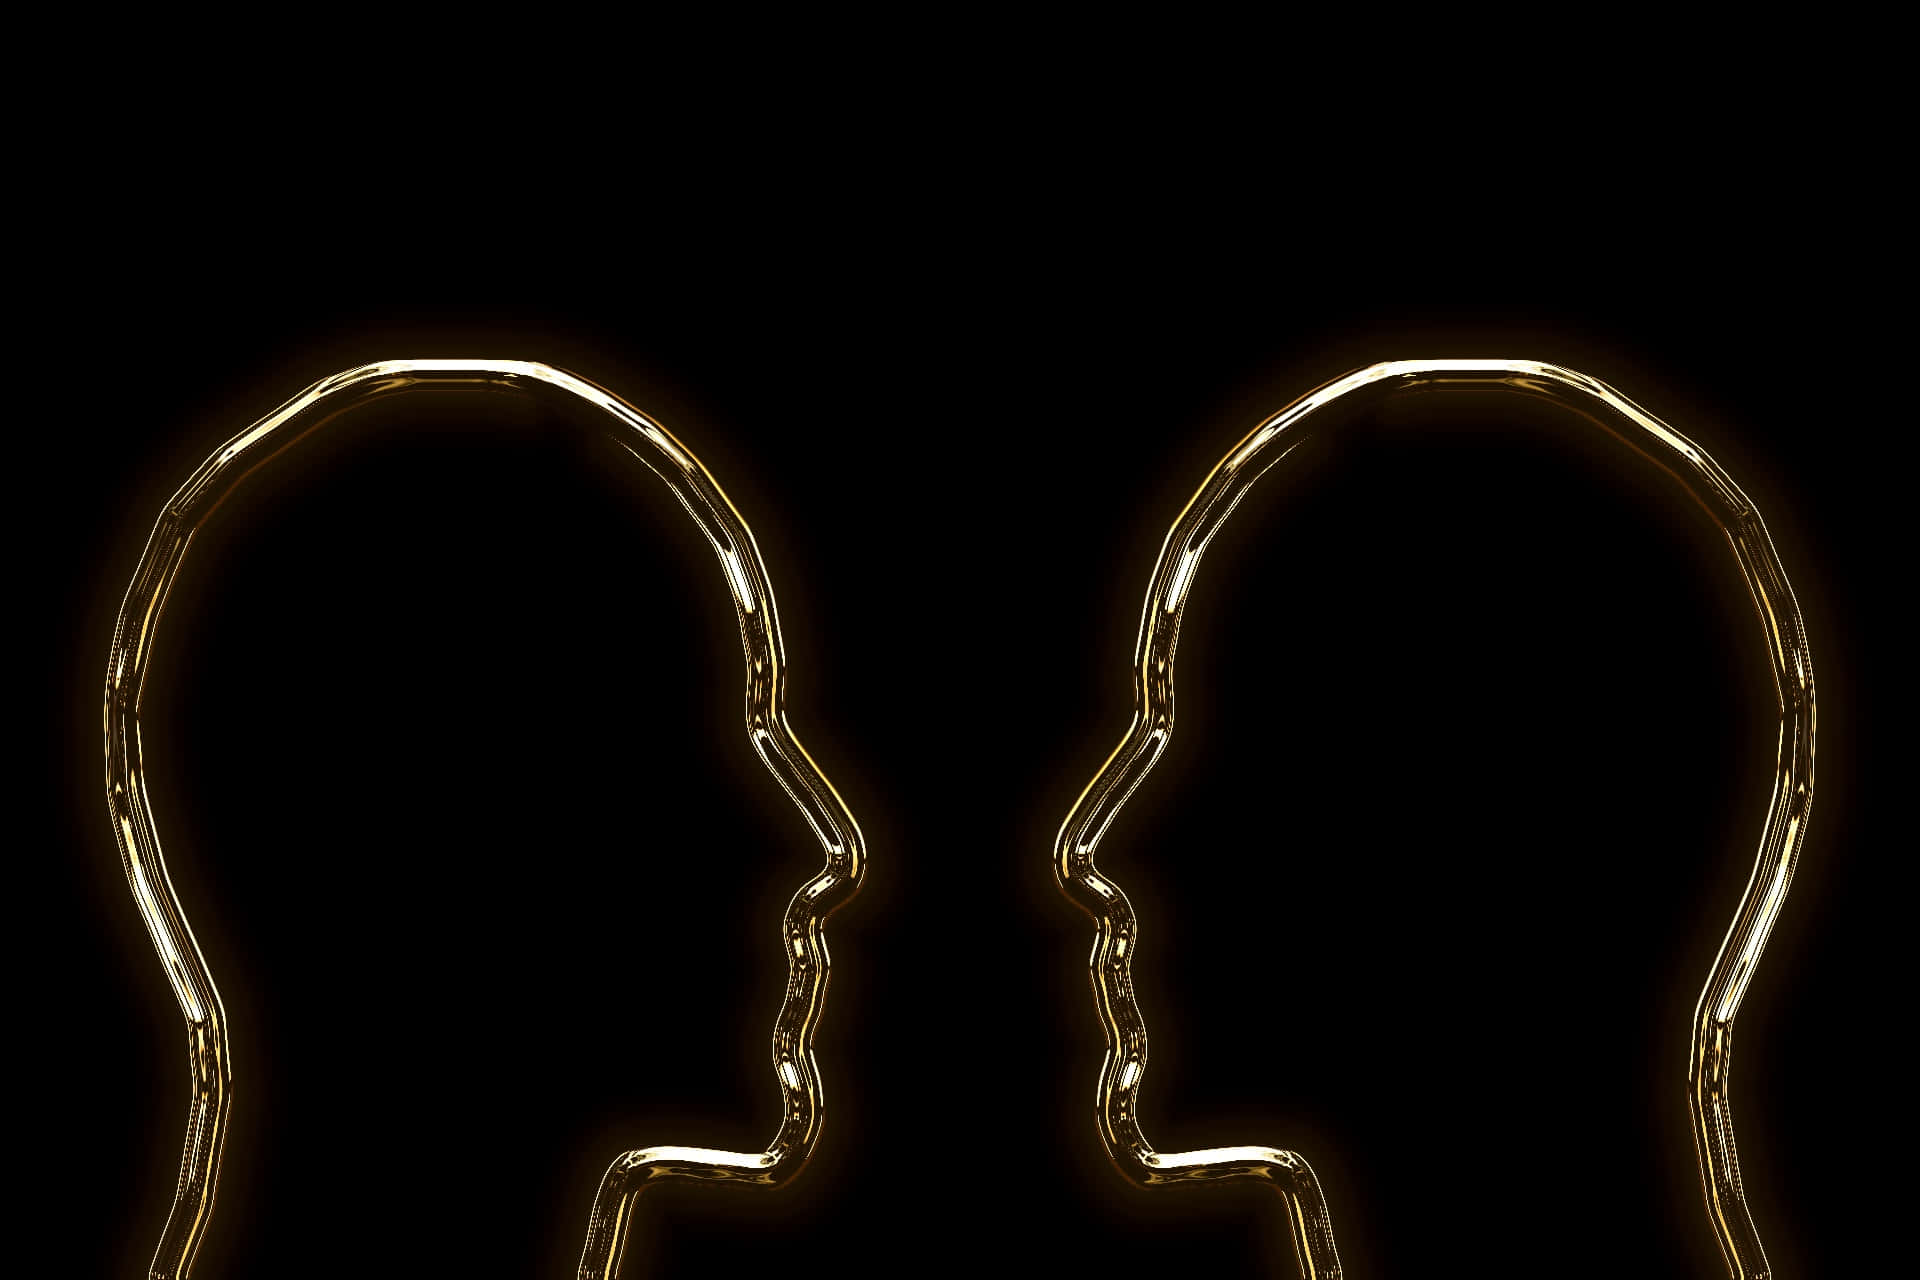 Two Golden Heads In Silhouette On A Black Background